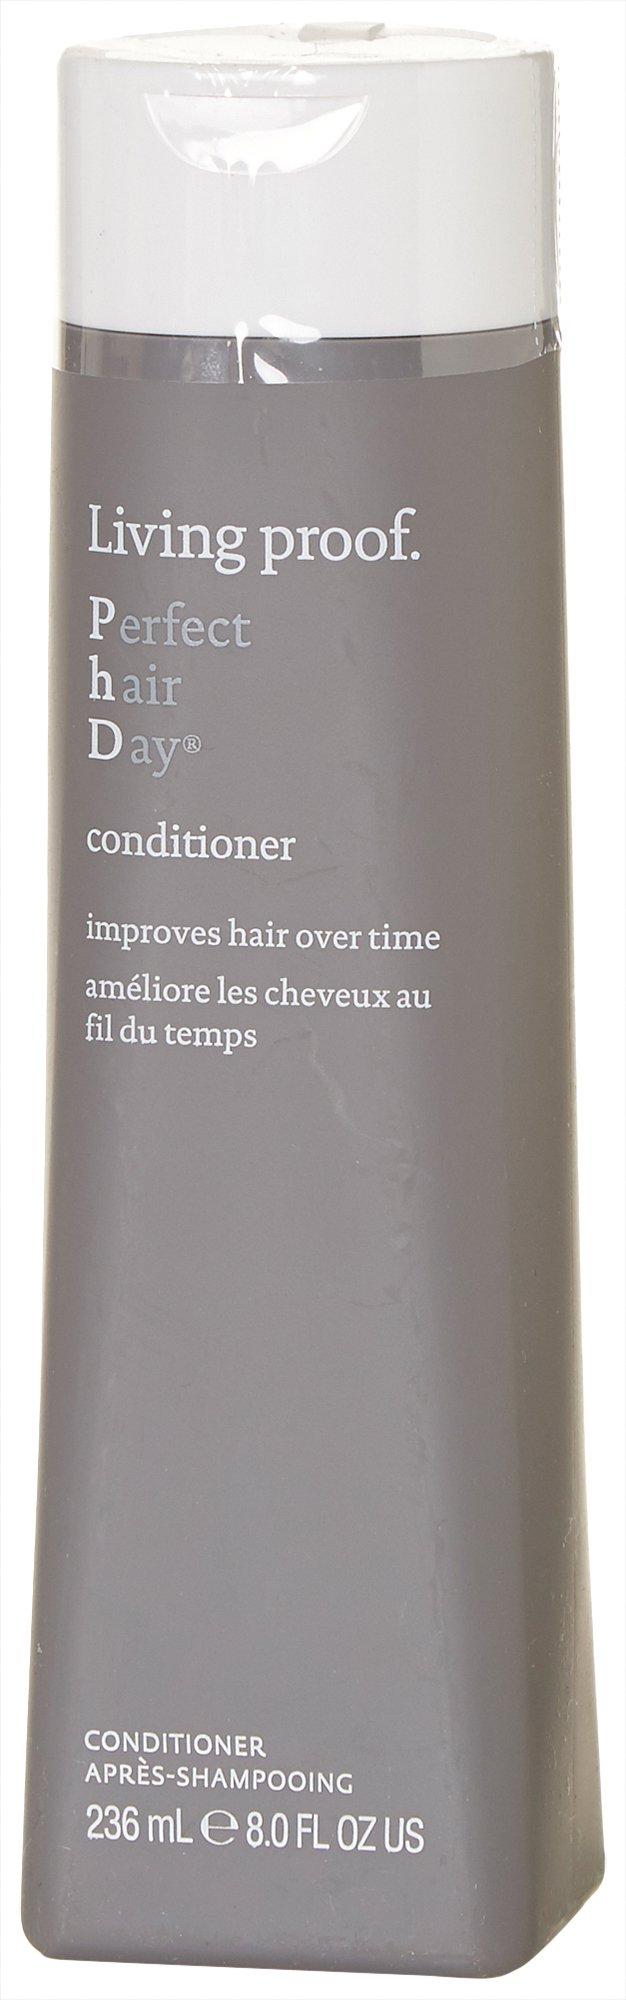 Living Proof Perfect Hair Day  8 fl. oz. Conditioner